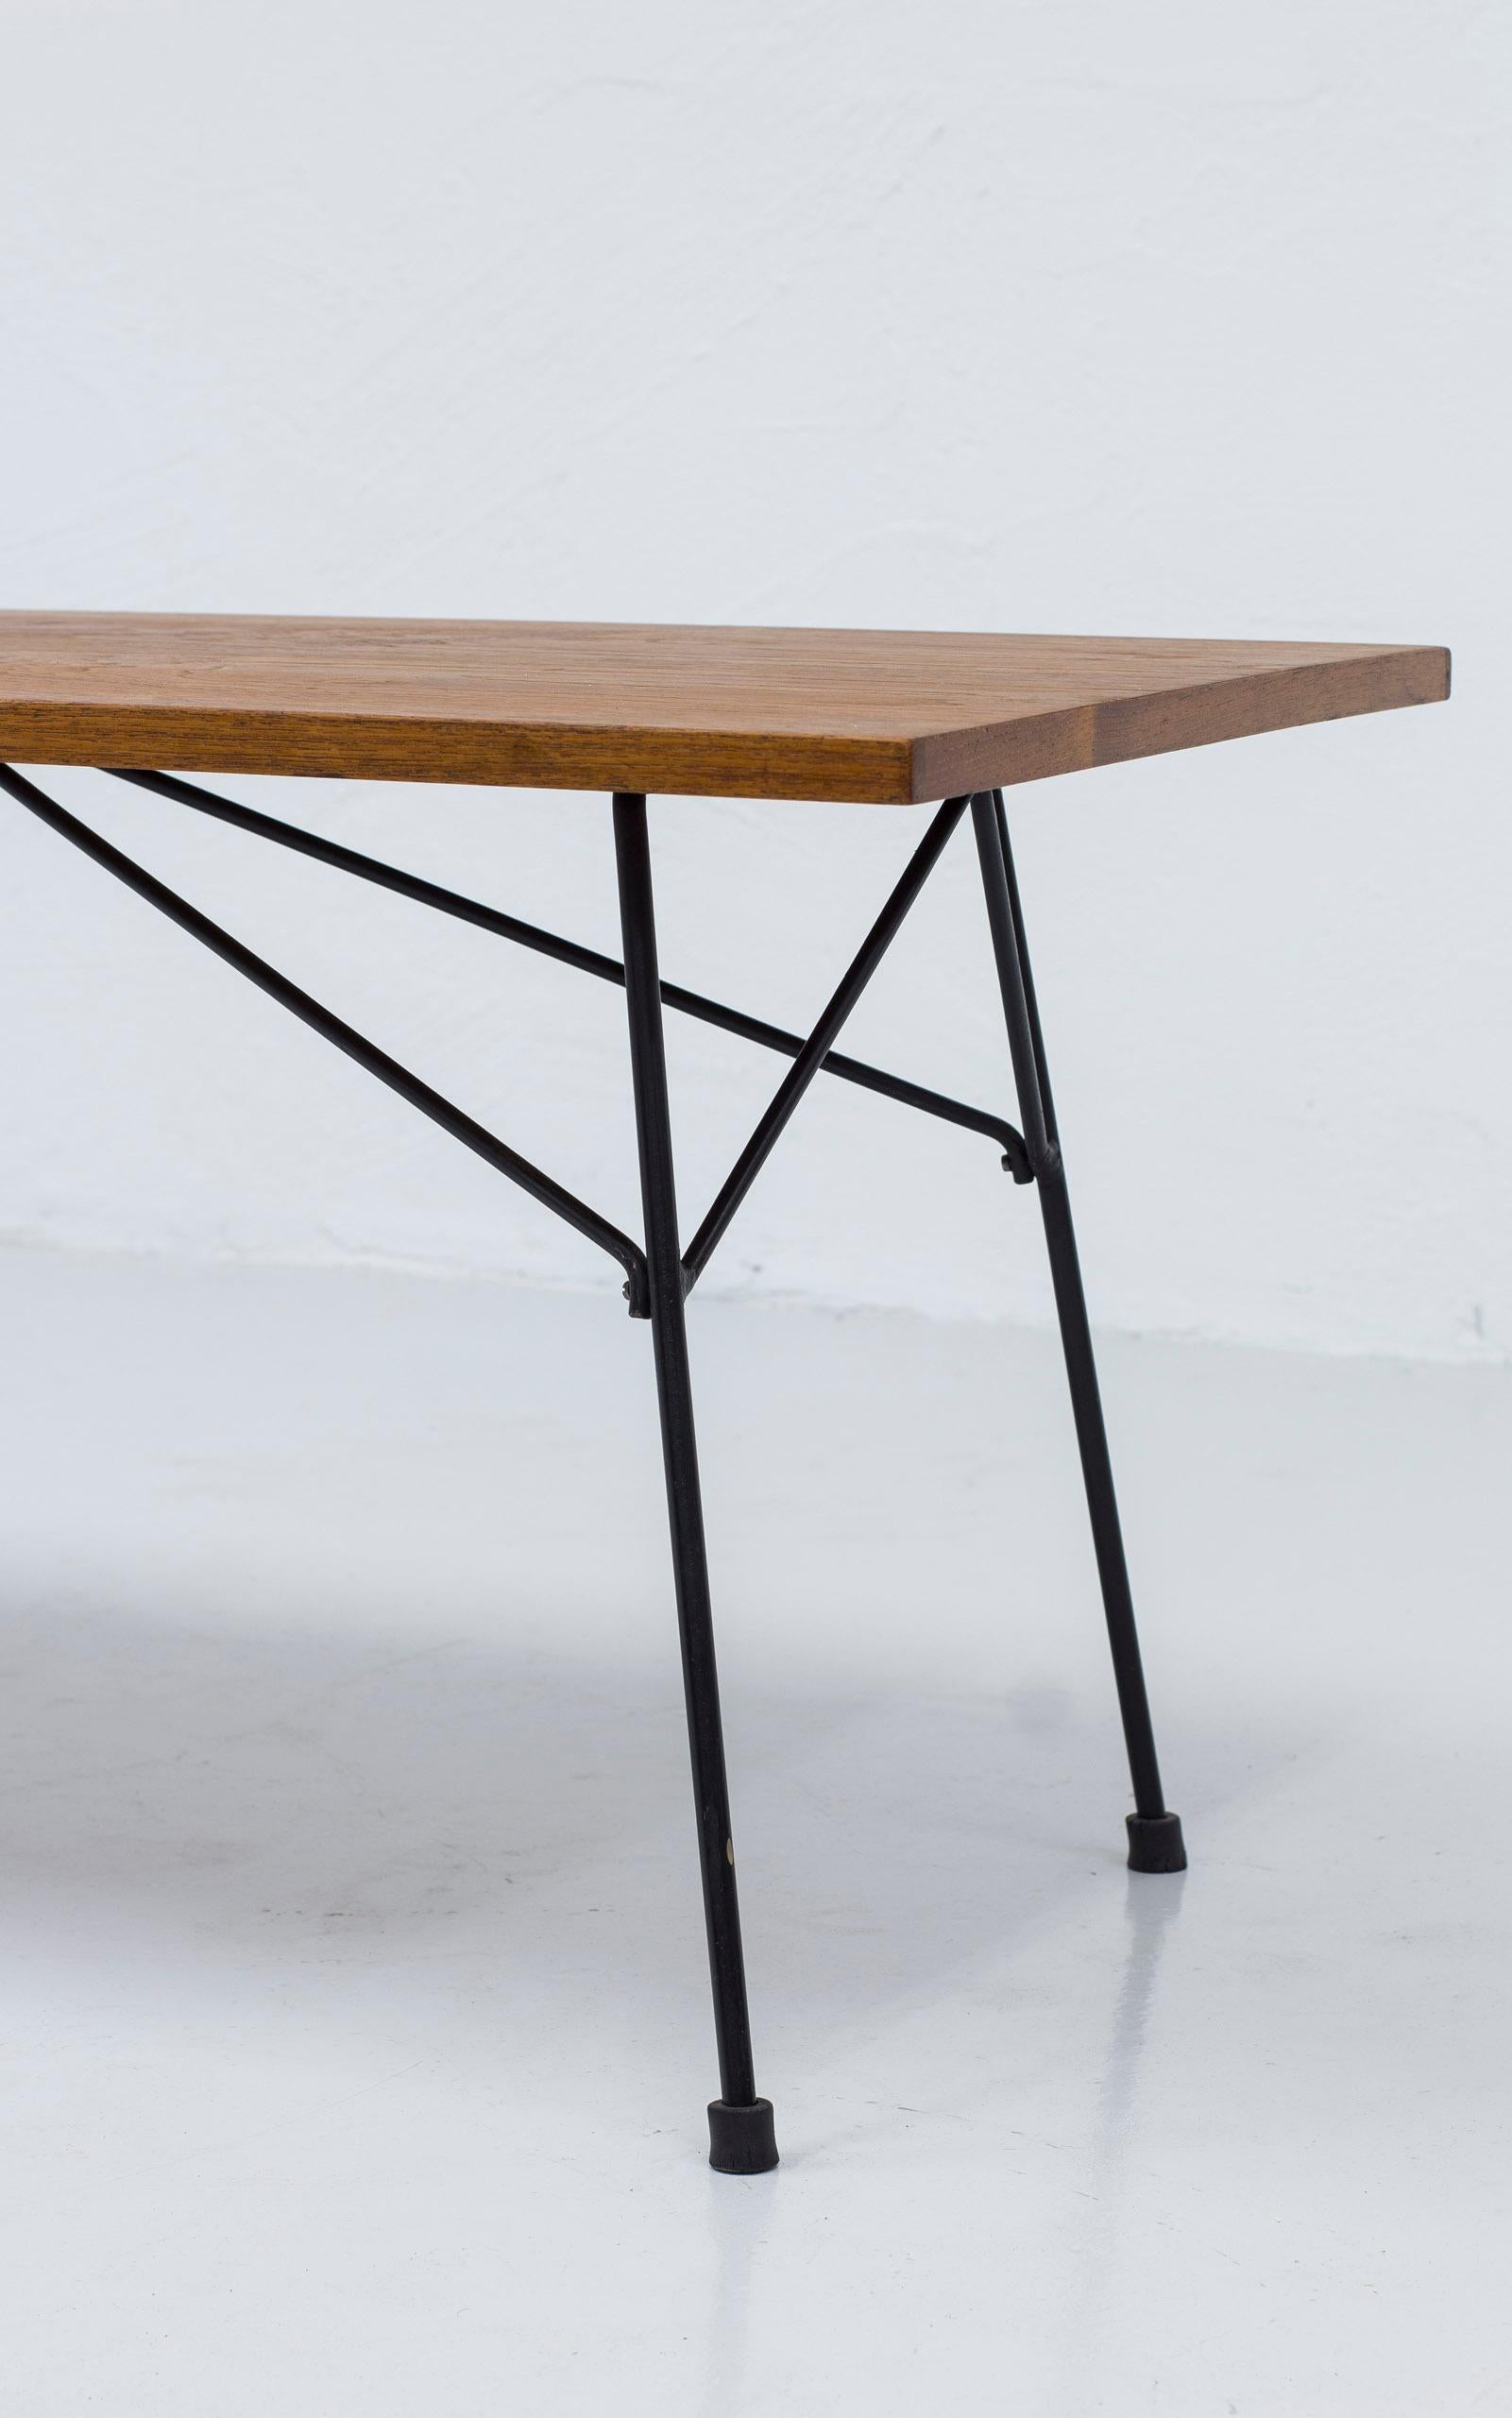 Mid-20th Century Teak and Metal Sofa Table Designed by Hans-Agne Jakobsson, Sweden, 1950s For Sale